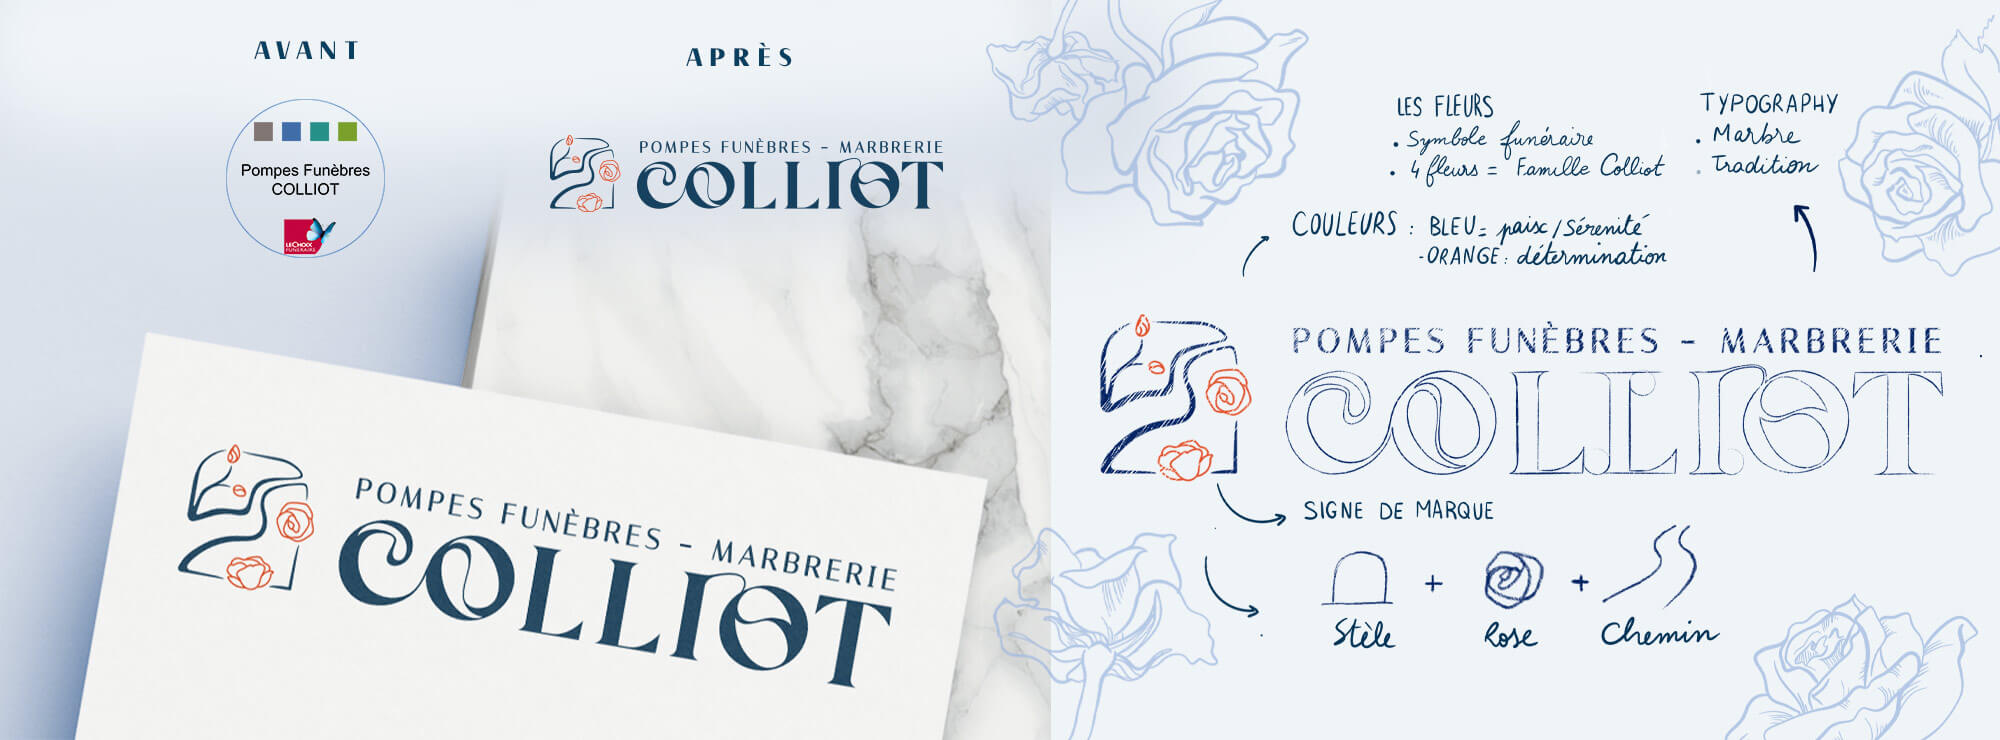 Colliot - a brand engraved in marble